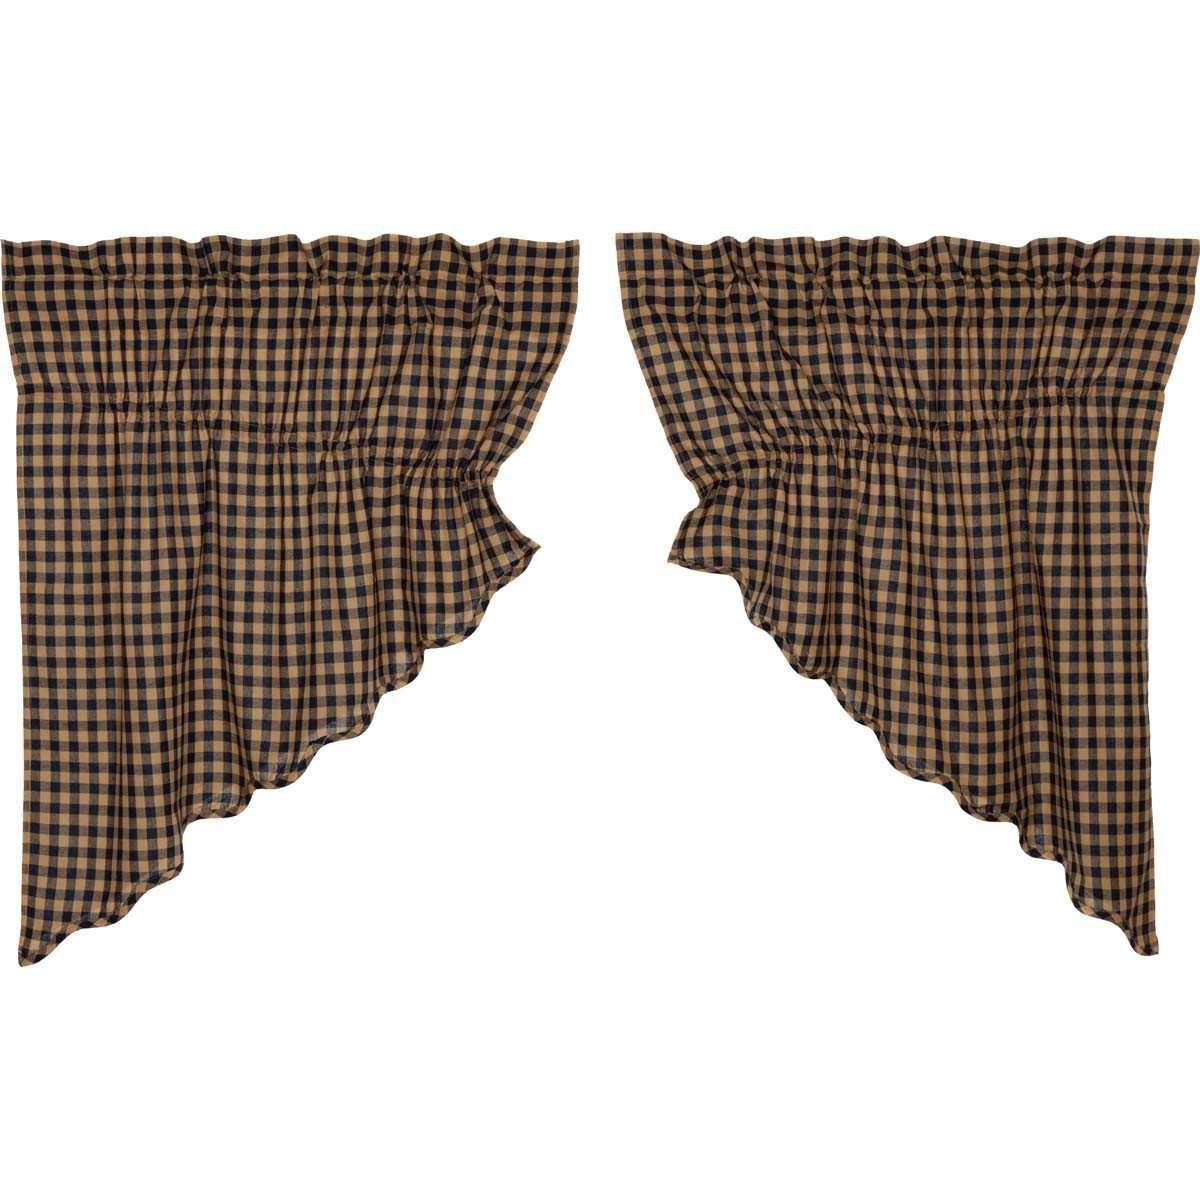 Navy Check Scalloped Prairie Swag Curtain Set of 2 36x36x18 VHC Brands online